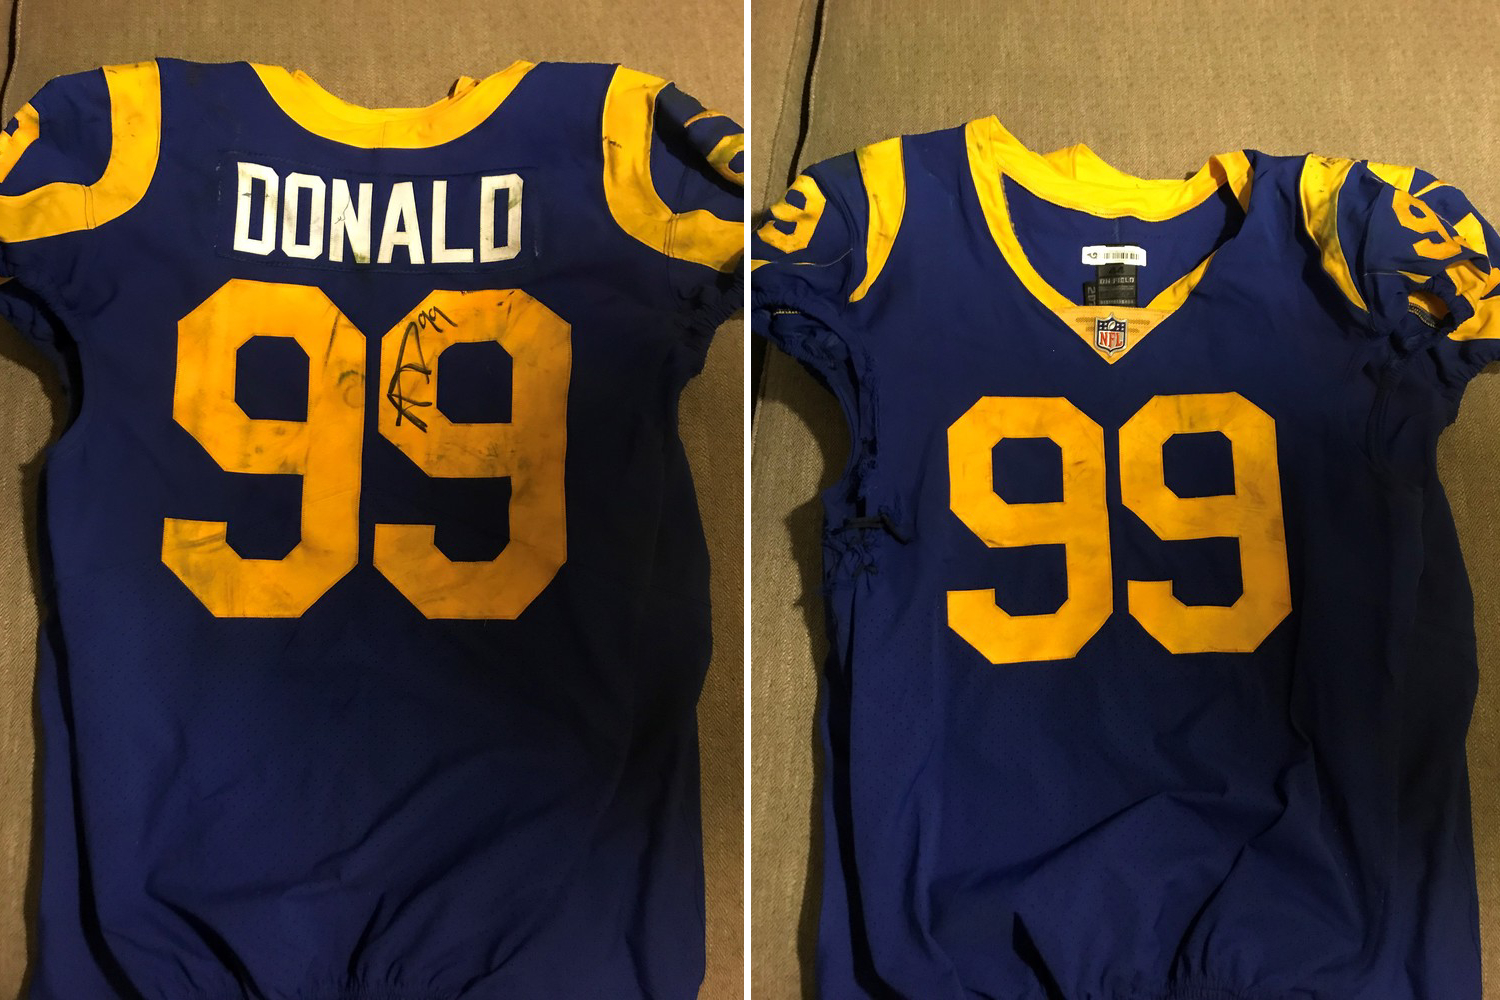 Aaron Donald gameworn jersey sells for $16K, benefits wildfire relief